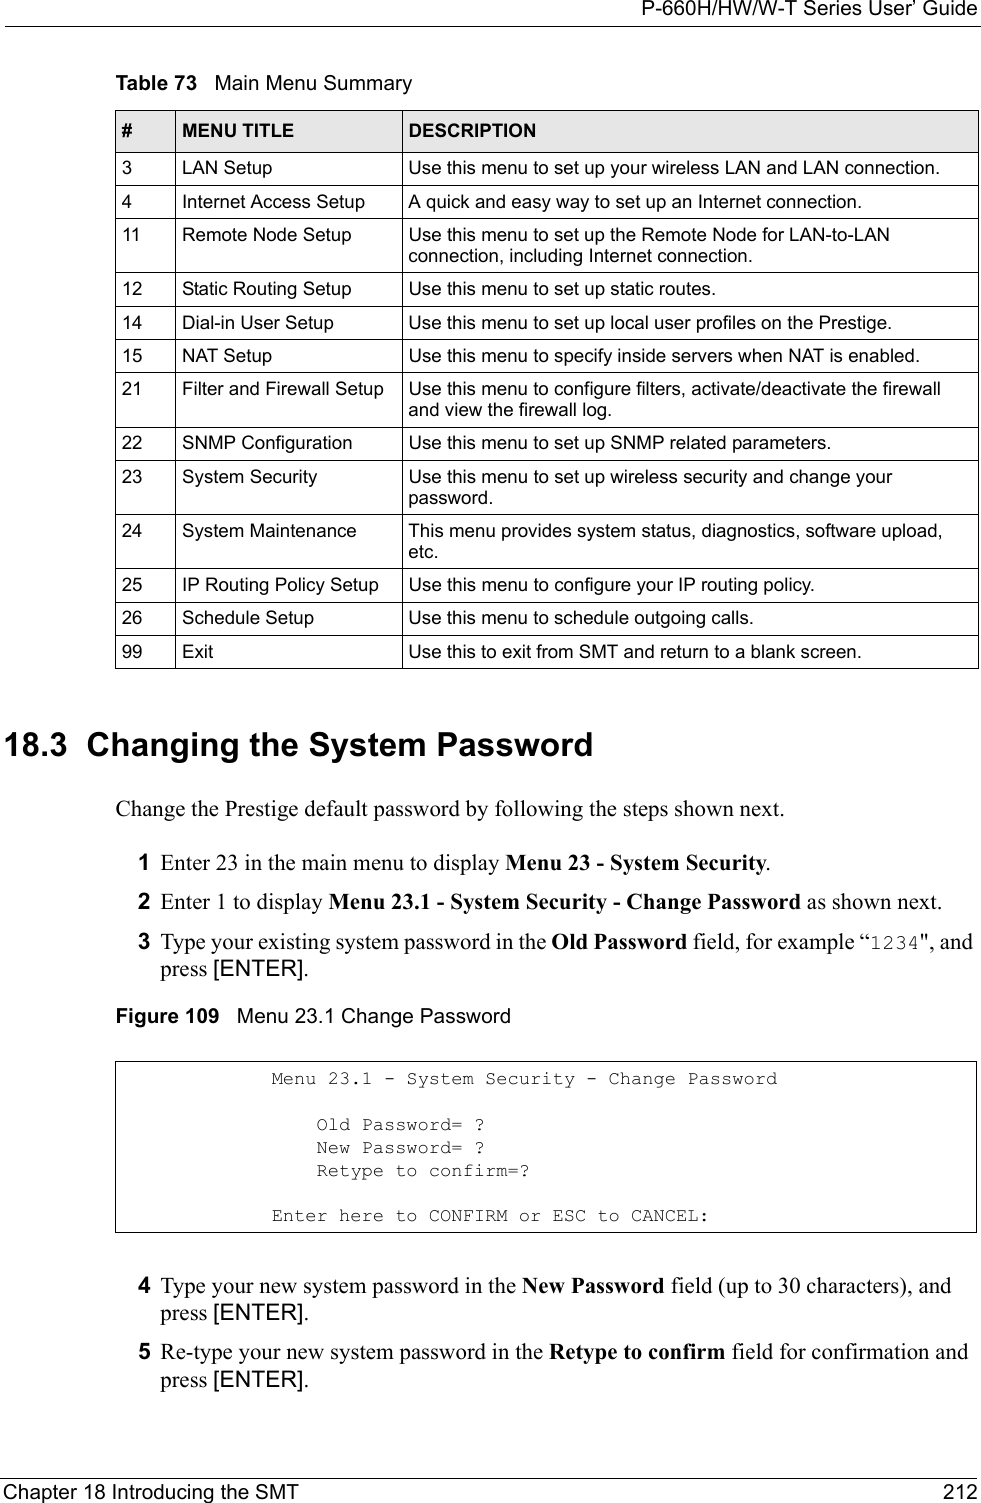 P-660H/HW/W-T Series User’ GuideChapter 18 Introducing the SMT 21218.3  Changing the System PasswordChange the Prestige default password by following the steps shown next. 1Enter 23 in the main menu to display Menu 23 - System Security.2Enter 1 to display Menu 23.1 - System Security - Change Password as shown next.3Type your existing system password in the Old Password field, for example “1234&quot;, and press [ENTER].Figure 109   Menu 23.1 Change Password4Type your new system password in the New Password field (up to 30 characters), and press [ENTER].5Re-type your new system password in the Retype to confirm field for confirmation and press [ENTER].3 LAN Setup Use this menu to set up your wireless LAN and LAN connection.4 Internet Access Setup A quick and easy way to set up an Internet connection.11 Remote Node Setup Use this menu to set up the Remote Node for LAN-to-LAN connection, including Internet connection.12 Static Routing Setup Use this menu to set up static routes. 14 Dial-in User Setup Use this menu to set up local user profiles on the Prestige.15 NAT Setup Use this menu to specify inside servers when NAT is enabled.21 Filter and Firewall Setup  Use this menu to configure filters, activate/deactivate the firewall and view the firewall log.22 SNMP Configuration  Use this menu to set up SNMP related parameters.23 System Security Use this menu to set up wireless security and change your password.24 System Maintenance This menu provides system status, diagnostics, software upload, etc.25 IP Routing Policy Setup Use this menu to configure your IP routing policy.26 Schedule Setup Use this menu to schedule outgoing calls.99 Exit Use this to exit from SMT and return to a blank screen.Table 73   Main Menu Summary#MENU TITLE DESCRIPTIONMenu 23.1 - System Security - Change Password    Old Password= ?    New Password= ?    Retype to confirm=?Enter here to CONFIRM or ESC to CANCEL: